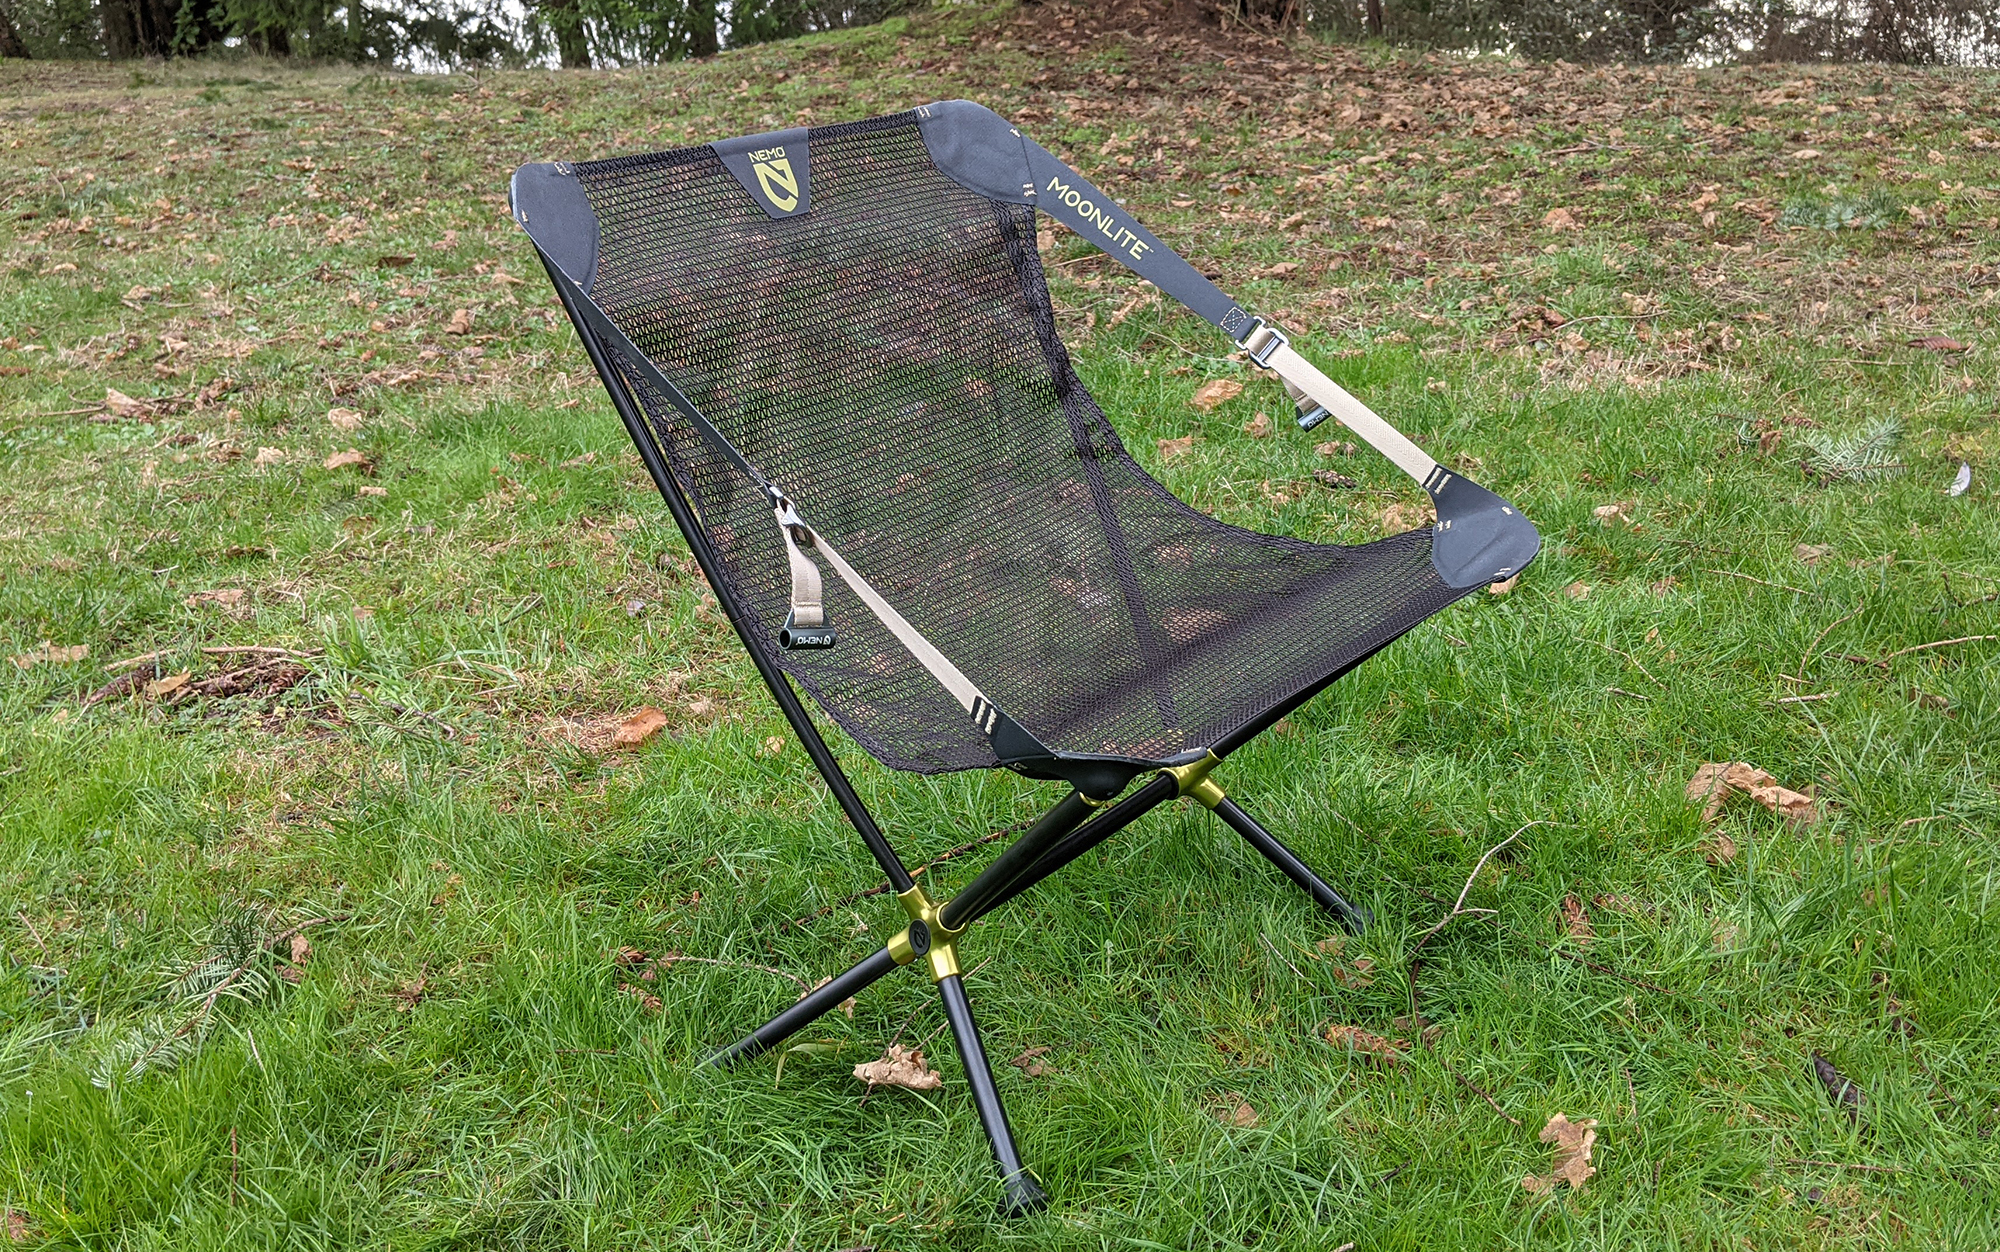 The NEMO Moonlite is the best overall backpacking chair.